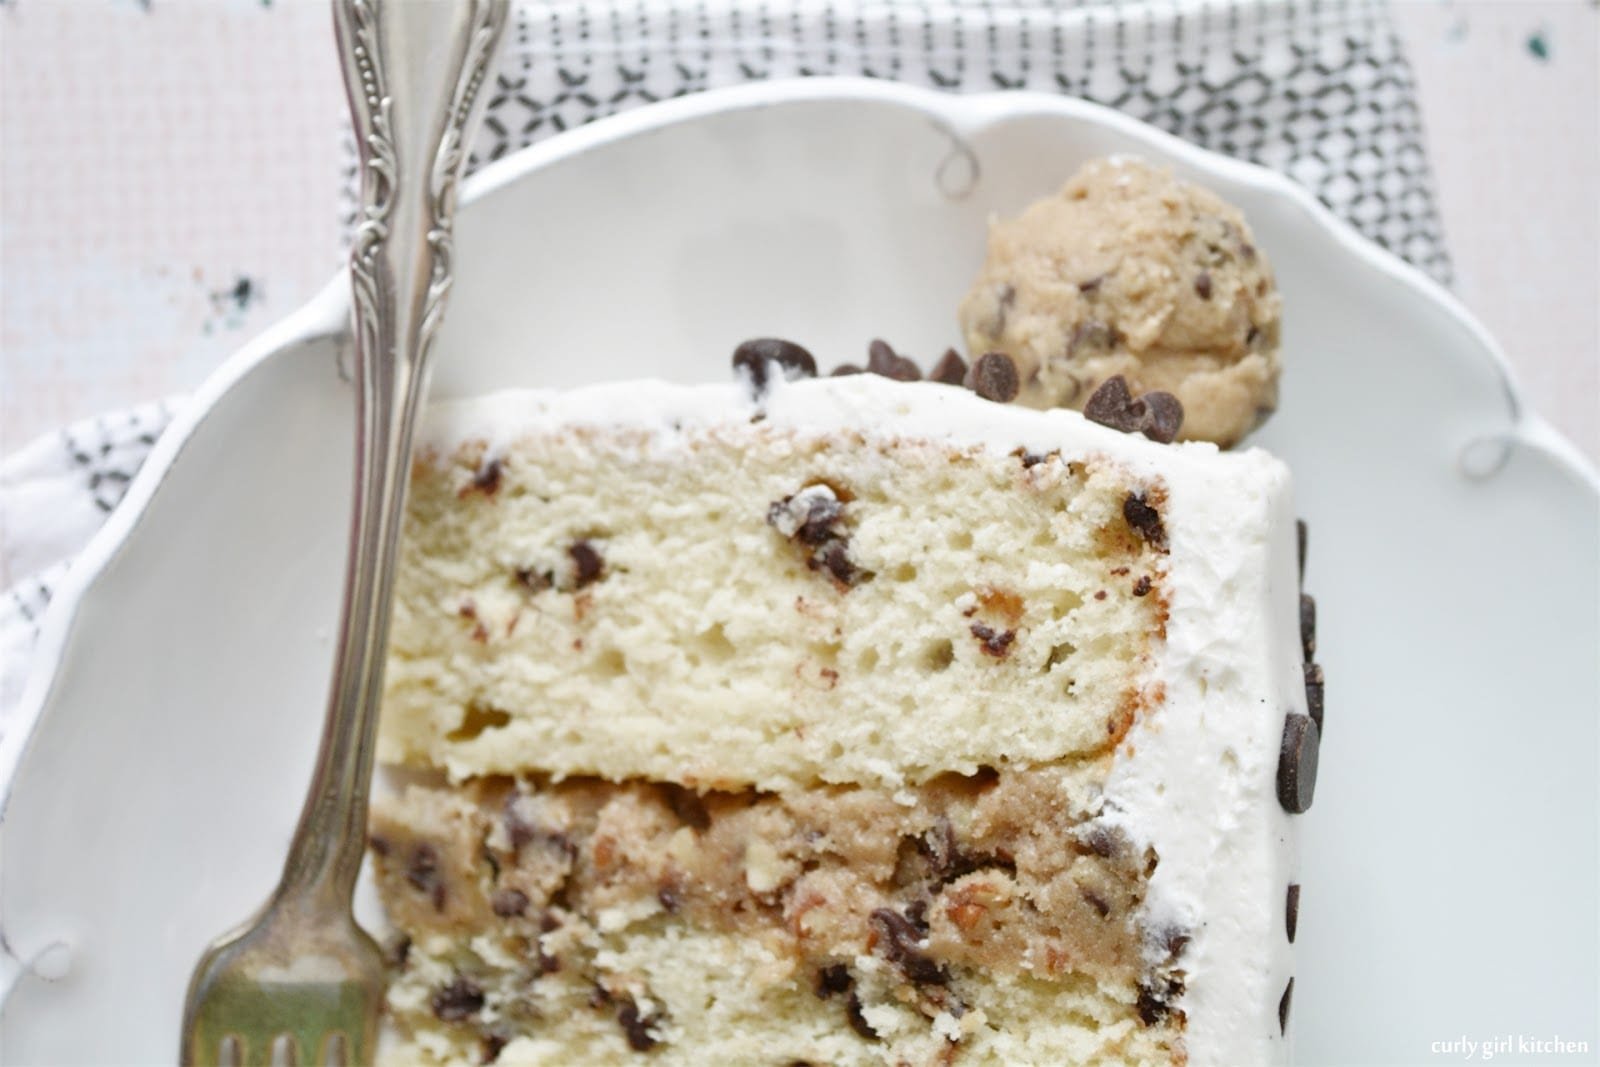 Curly Girl Kitchen  Chocolate Chip Cookie Dough Cake